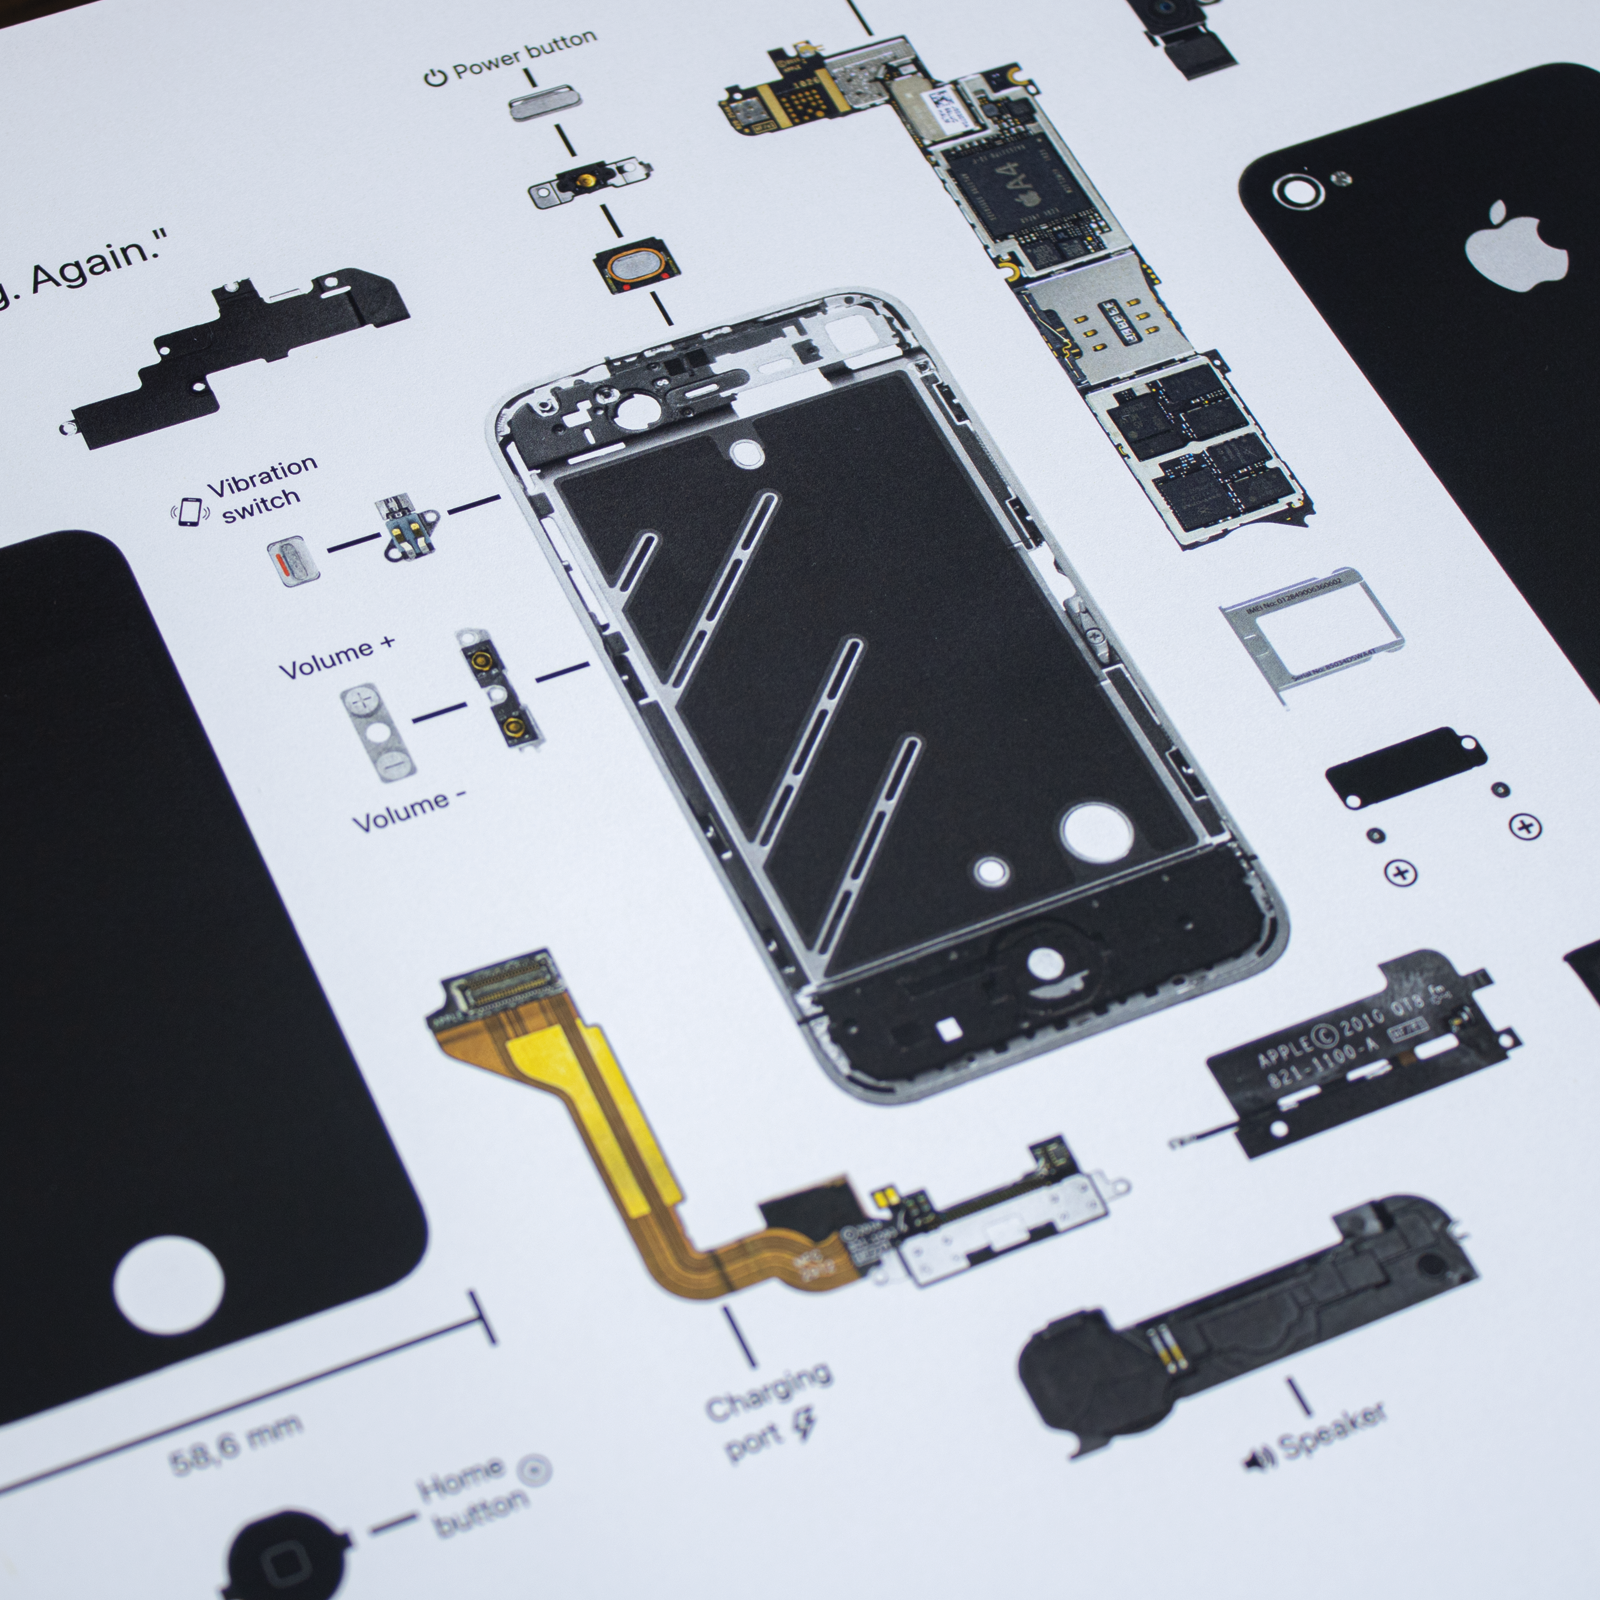 Picture frame of the iPhone 4 parts